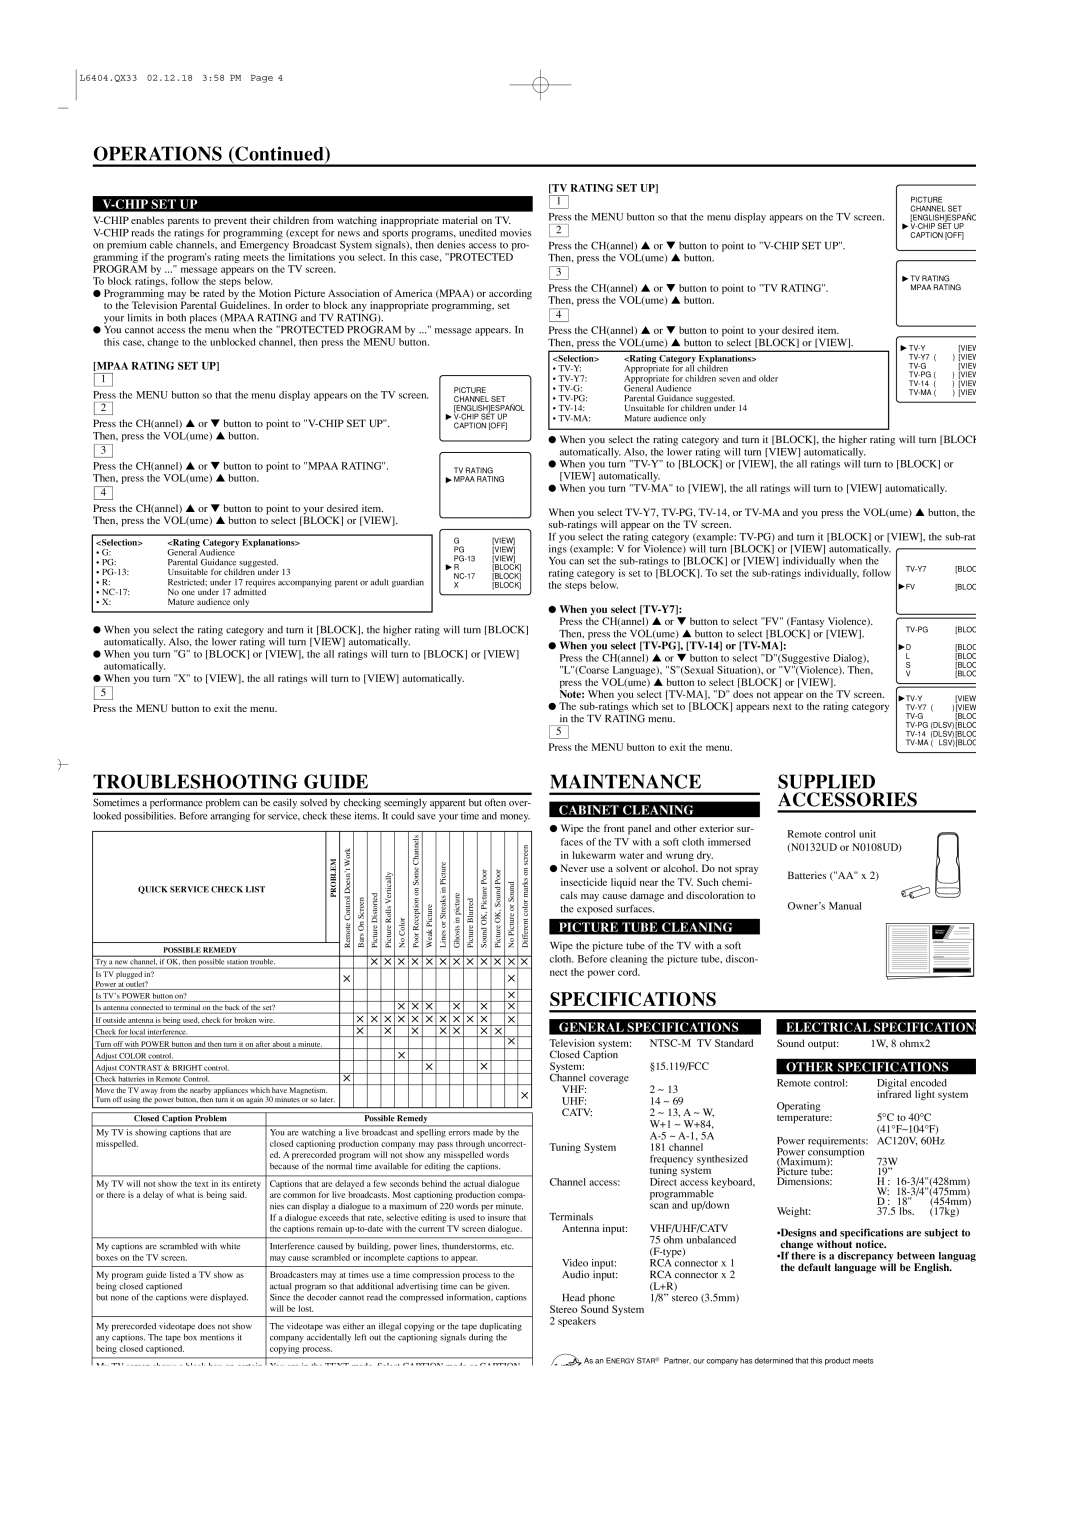 Sylvania SST4193S OPERATIONS Continued, Troubleshooting Guide, Maintenance, Supplied Accessories, Specifications 